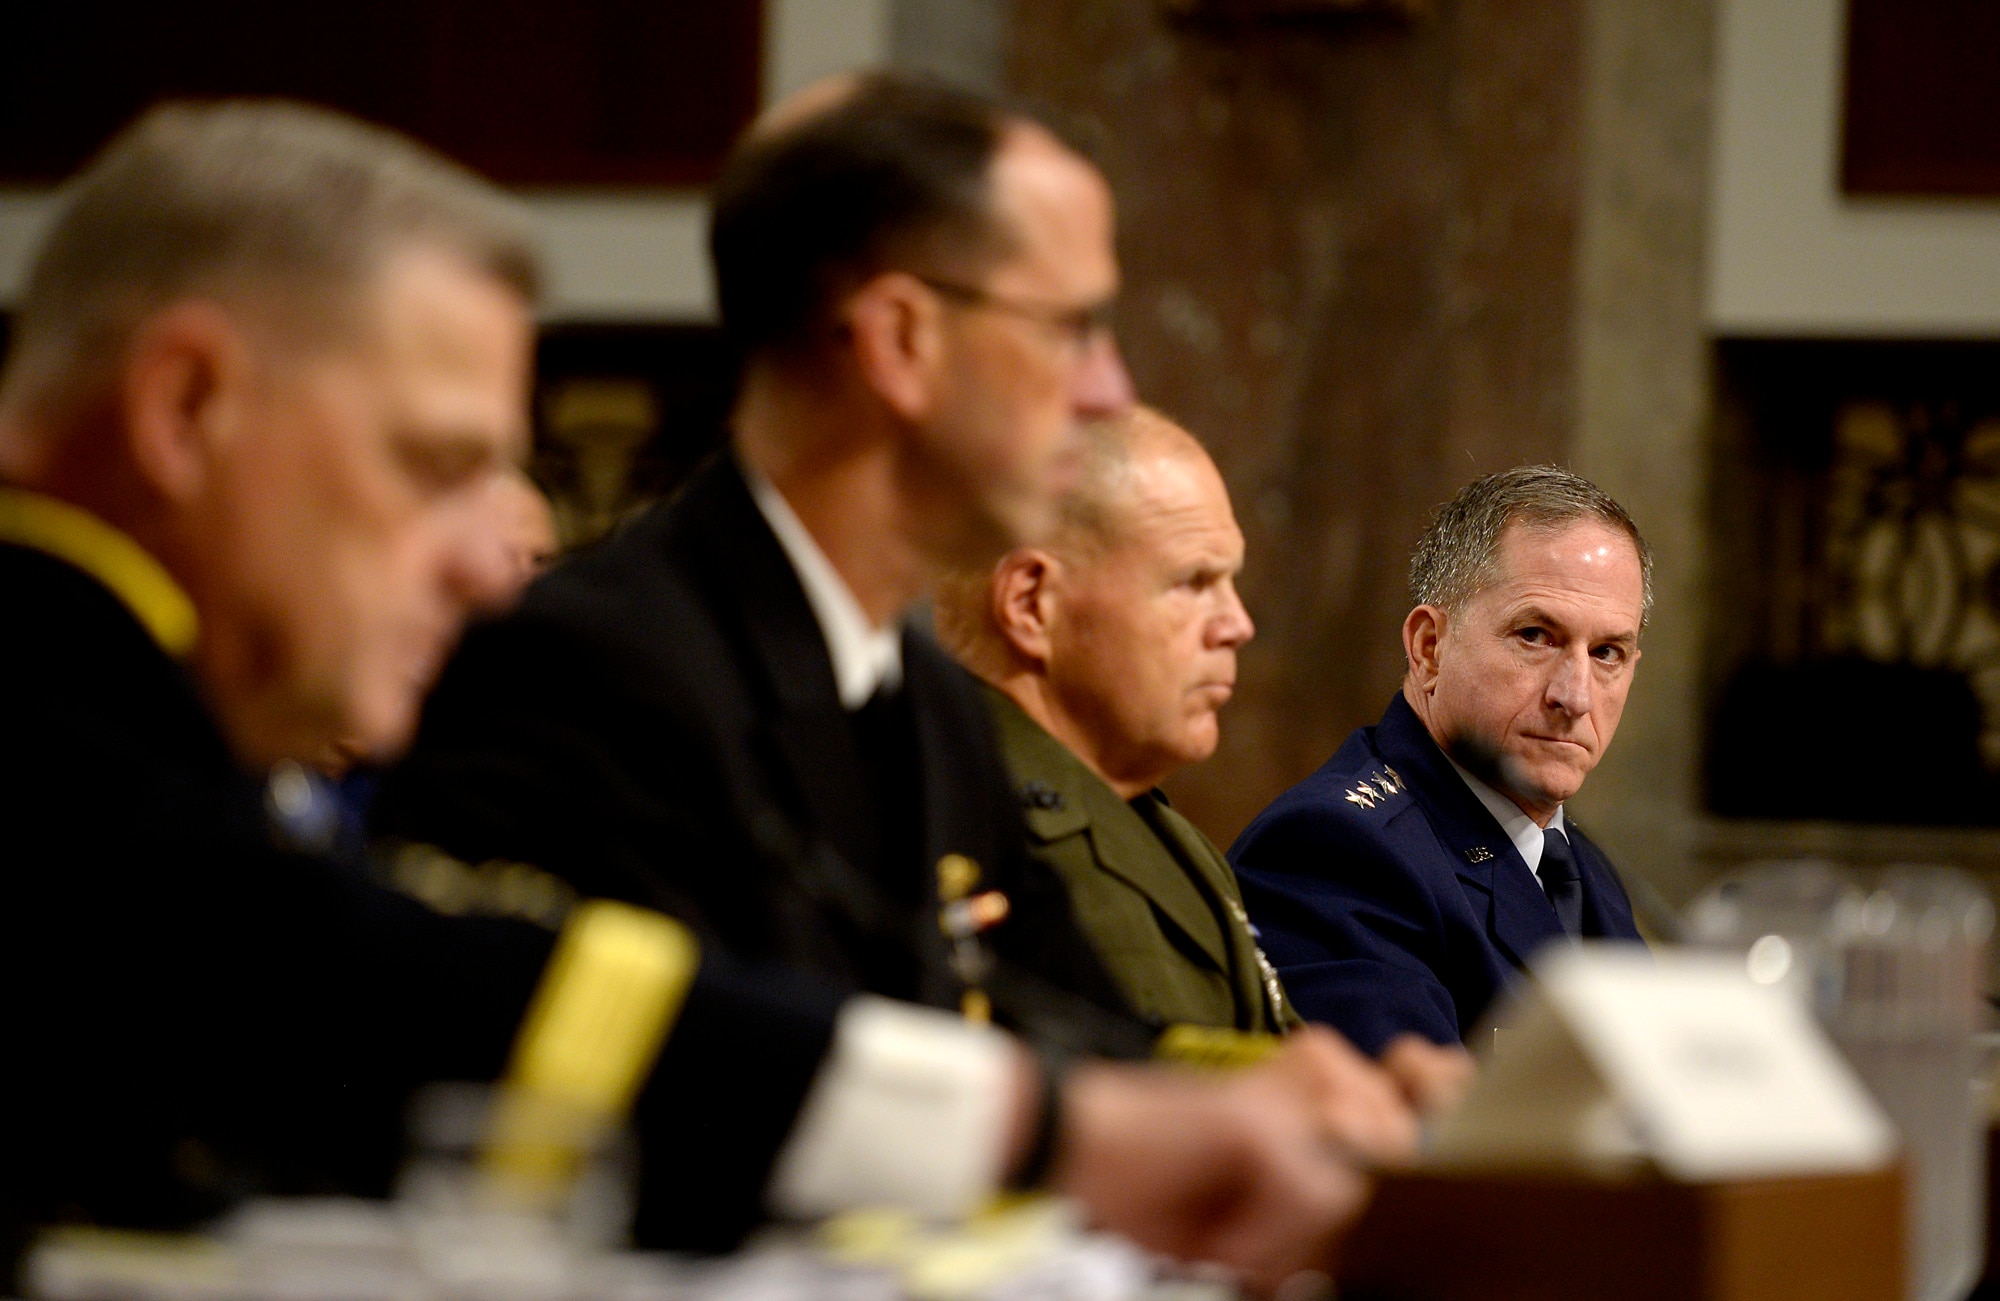 Air Force Chief of Staff Gen. Dave Goldfein testifies before the Senate Armed Services Committee during a hearing about Defense Department readiness Sept. 15, 2016, in Washington, D.C.  Goldfein joined Chief of Staff of the Army Gen. Mark A. Milley, Chief of Naval Operations Adm. John Richardson and Commandant of the Marine Corps Gen. Robert B. Neller during the hearing.  (U.S. Air Force photo/Scott M. Ash)